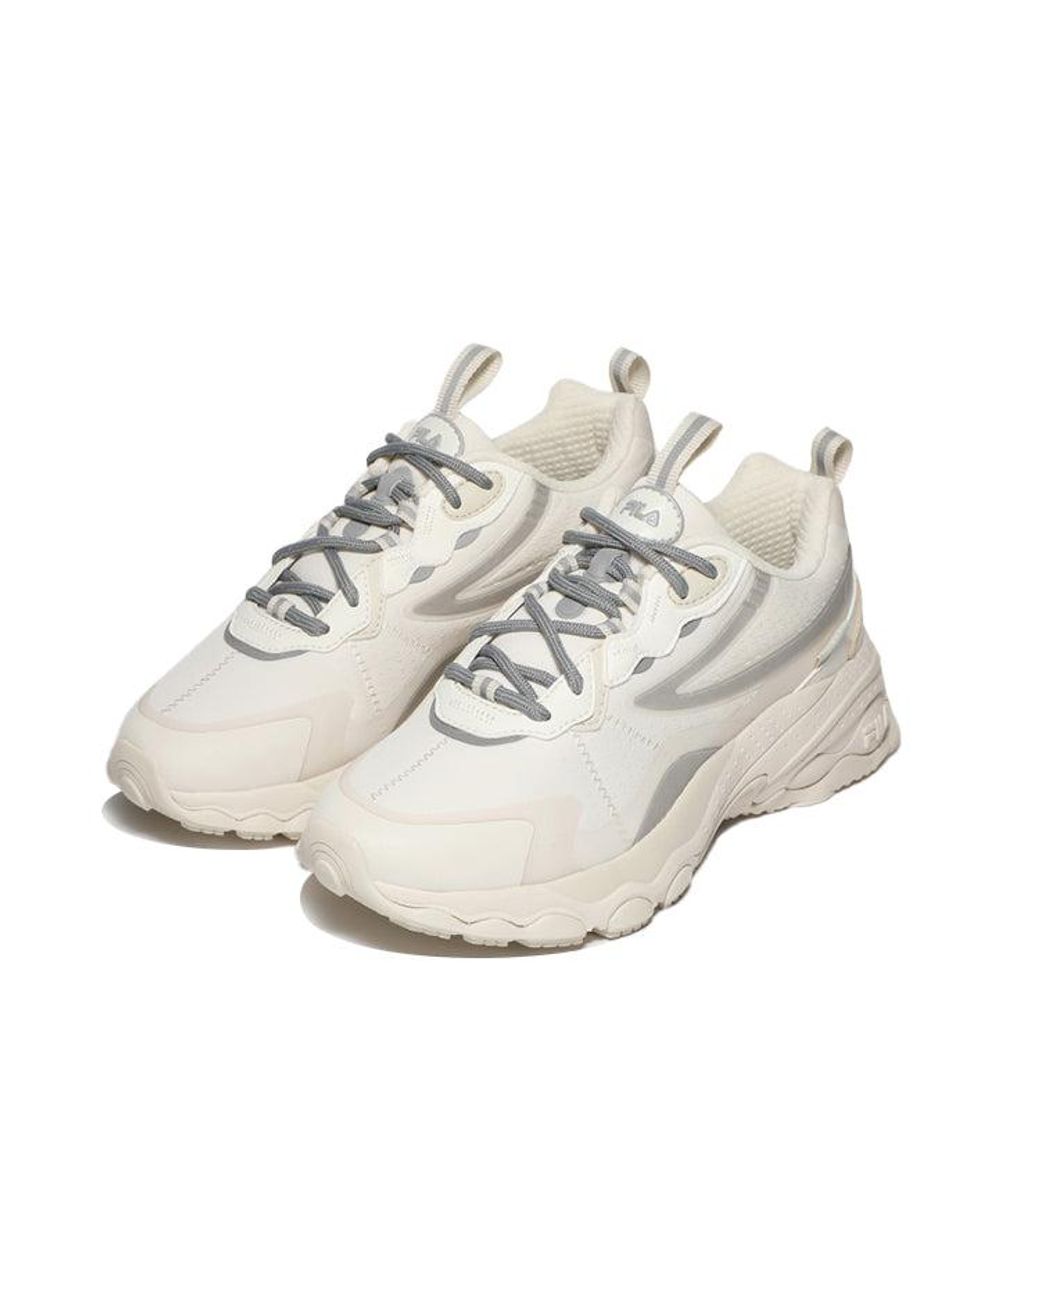 Fila Bubble Tr Low Top Running Shoes White/grey | Lyst